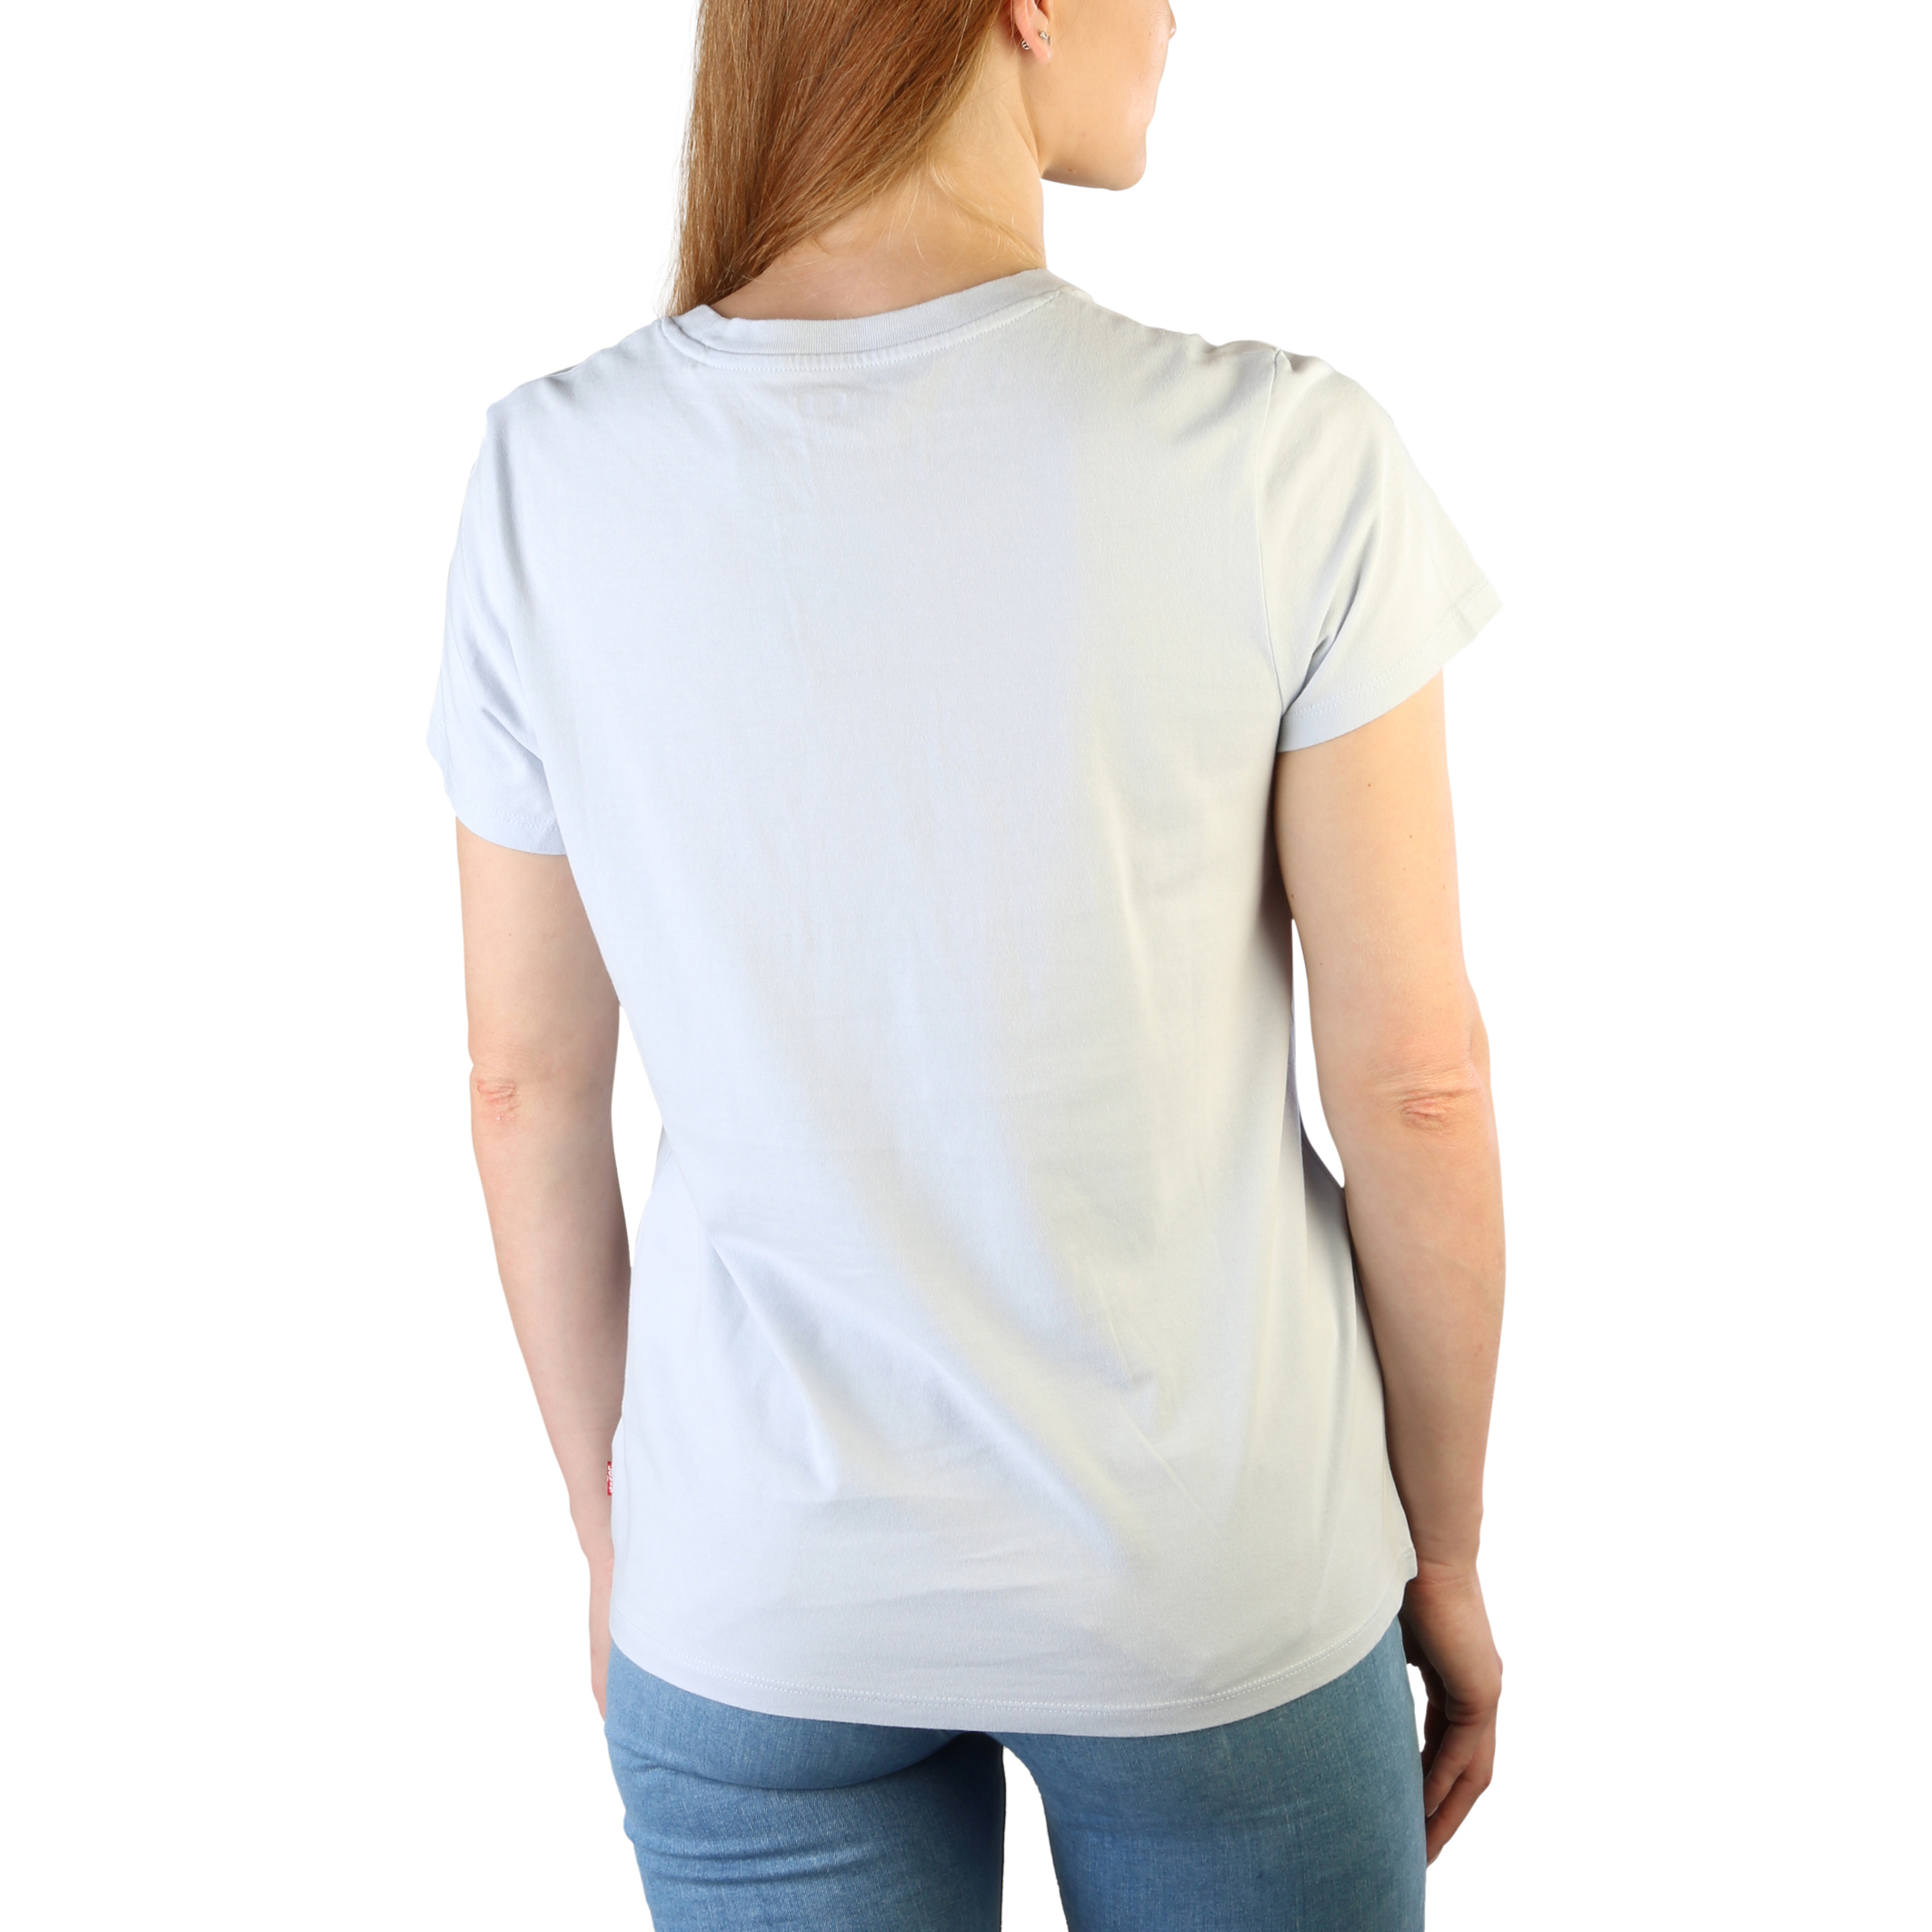 Levi's Blue T-shirts for Women - 17369_THE-PERFECT